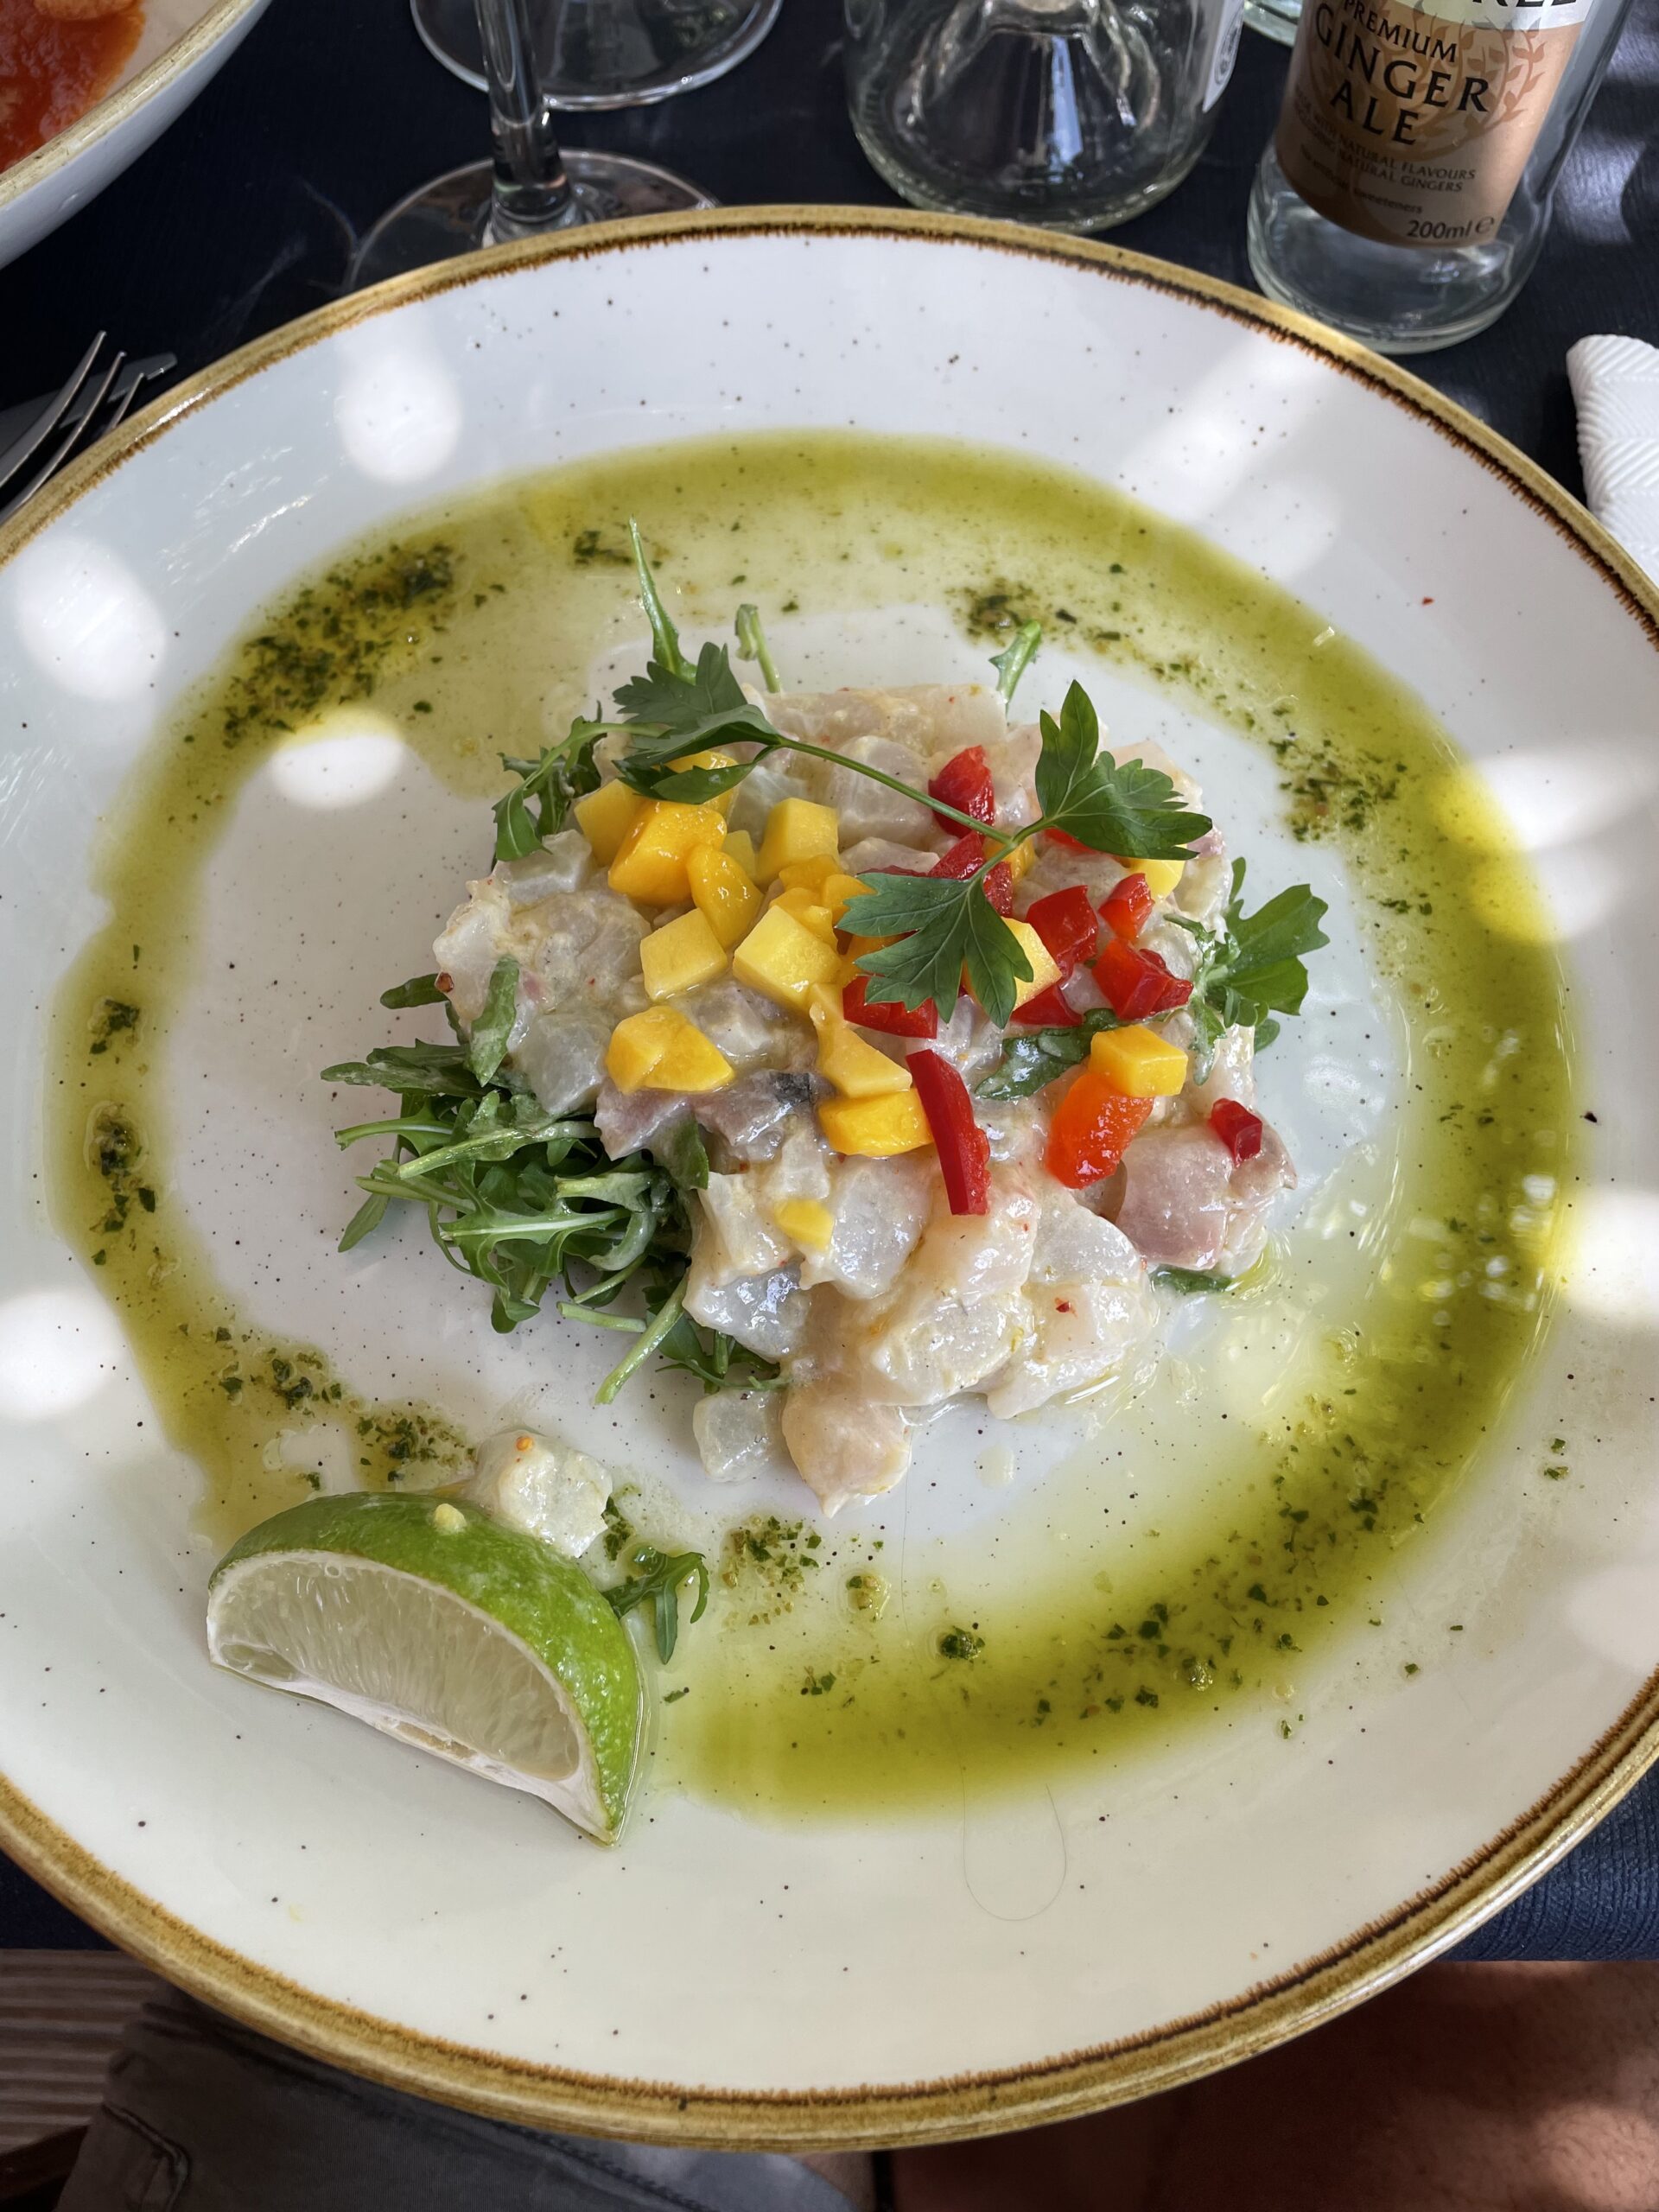 Sea Bream Ceviche at Plage Beau Rivage (Photo Credit: Kwin Mosby)